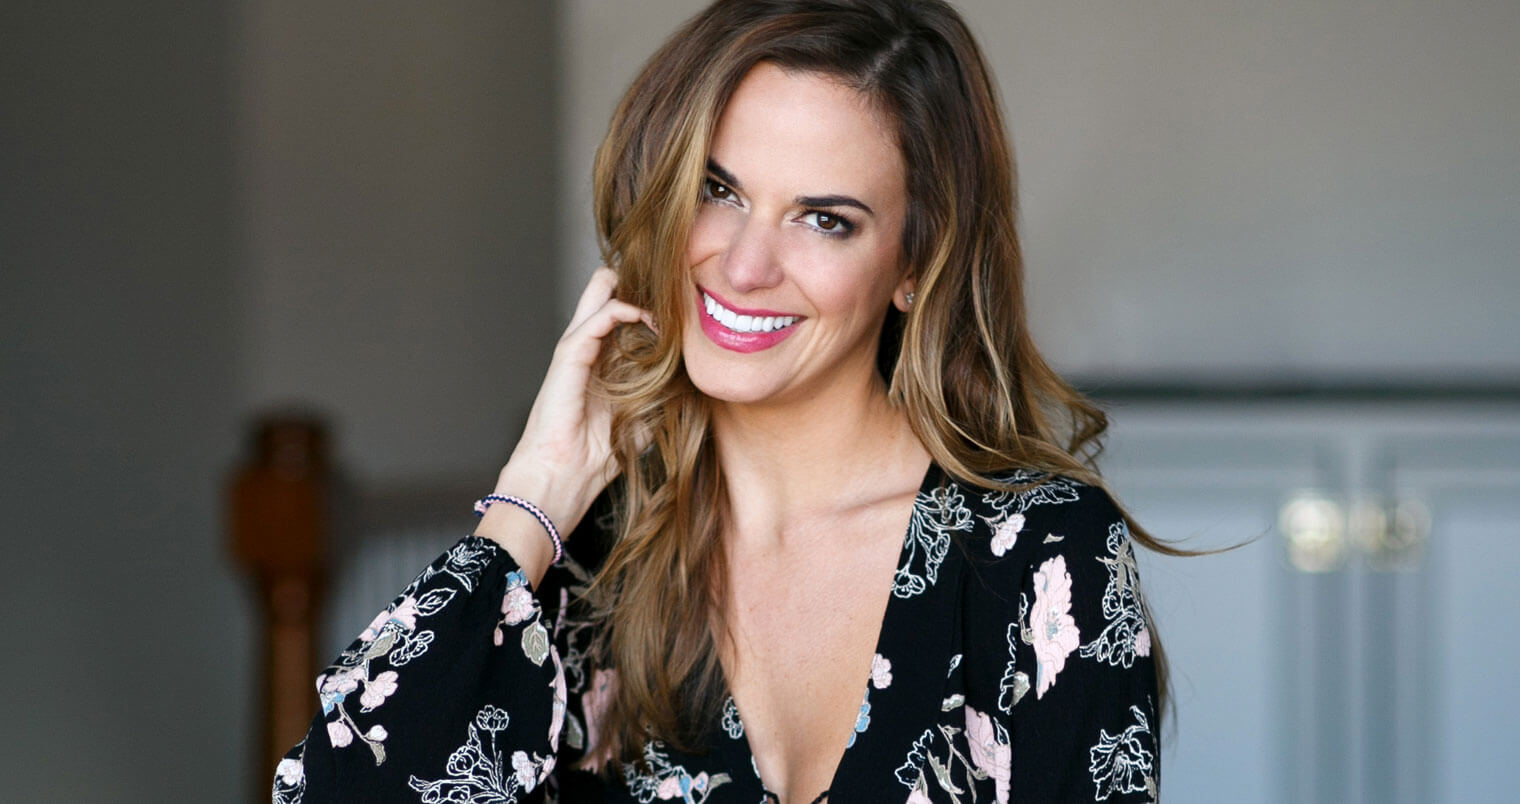 Chillin' with Jena Sims, featured image